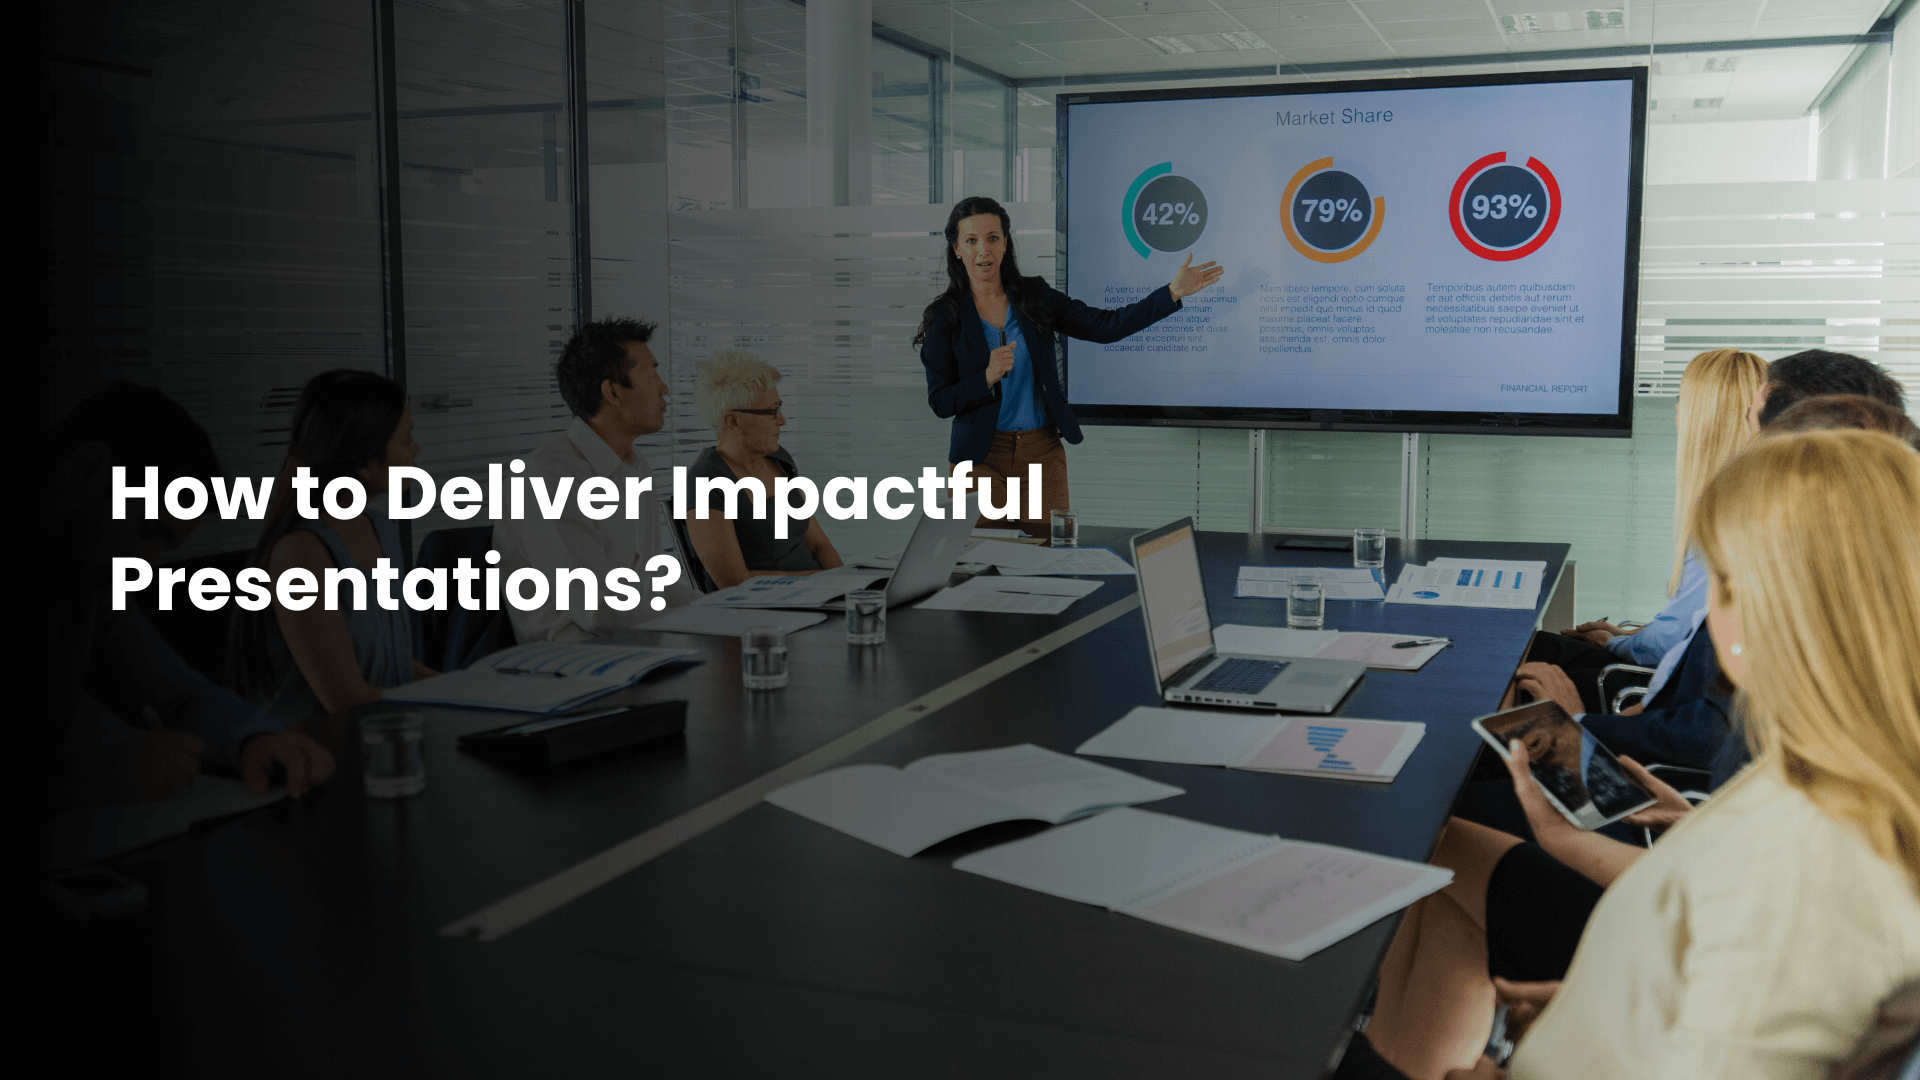 deliver presentations with impact